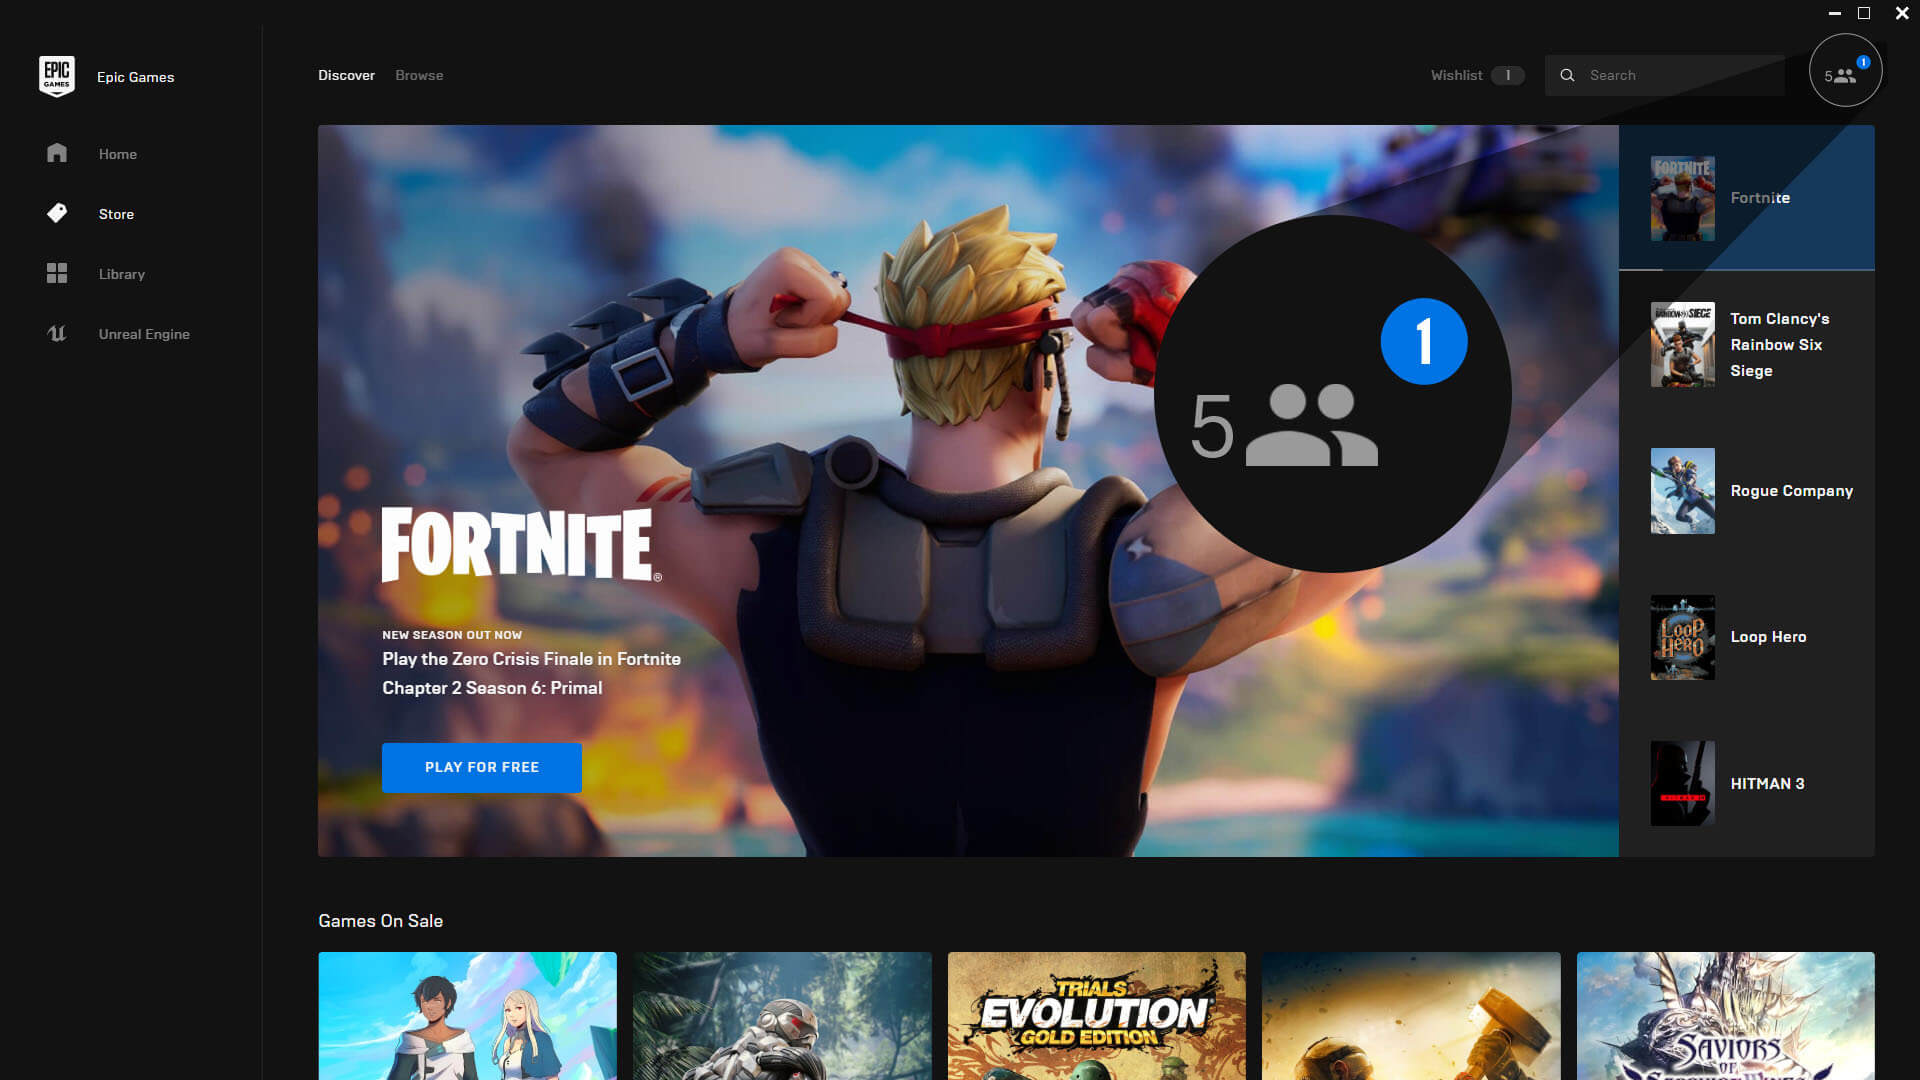 A screenshot of the Epic Games launcher highlighting the social features on the top bar.